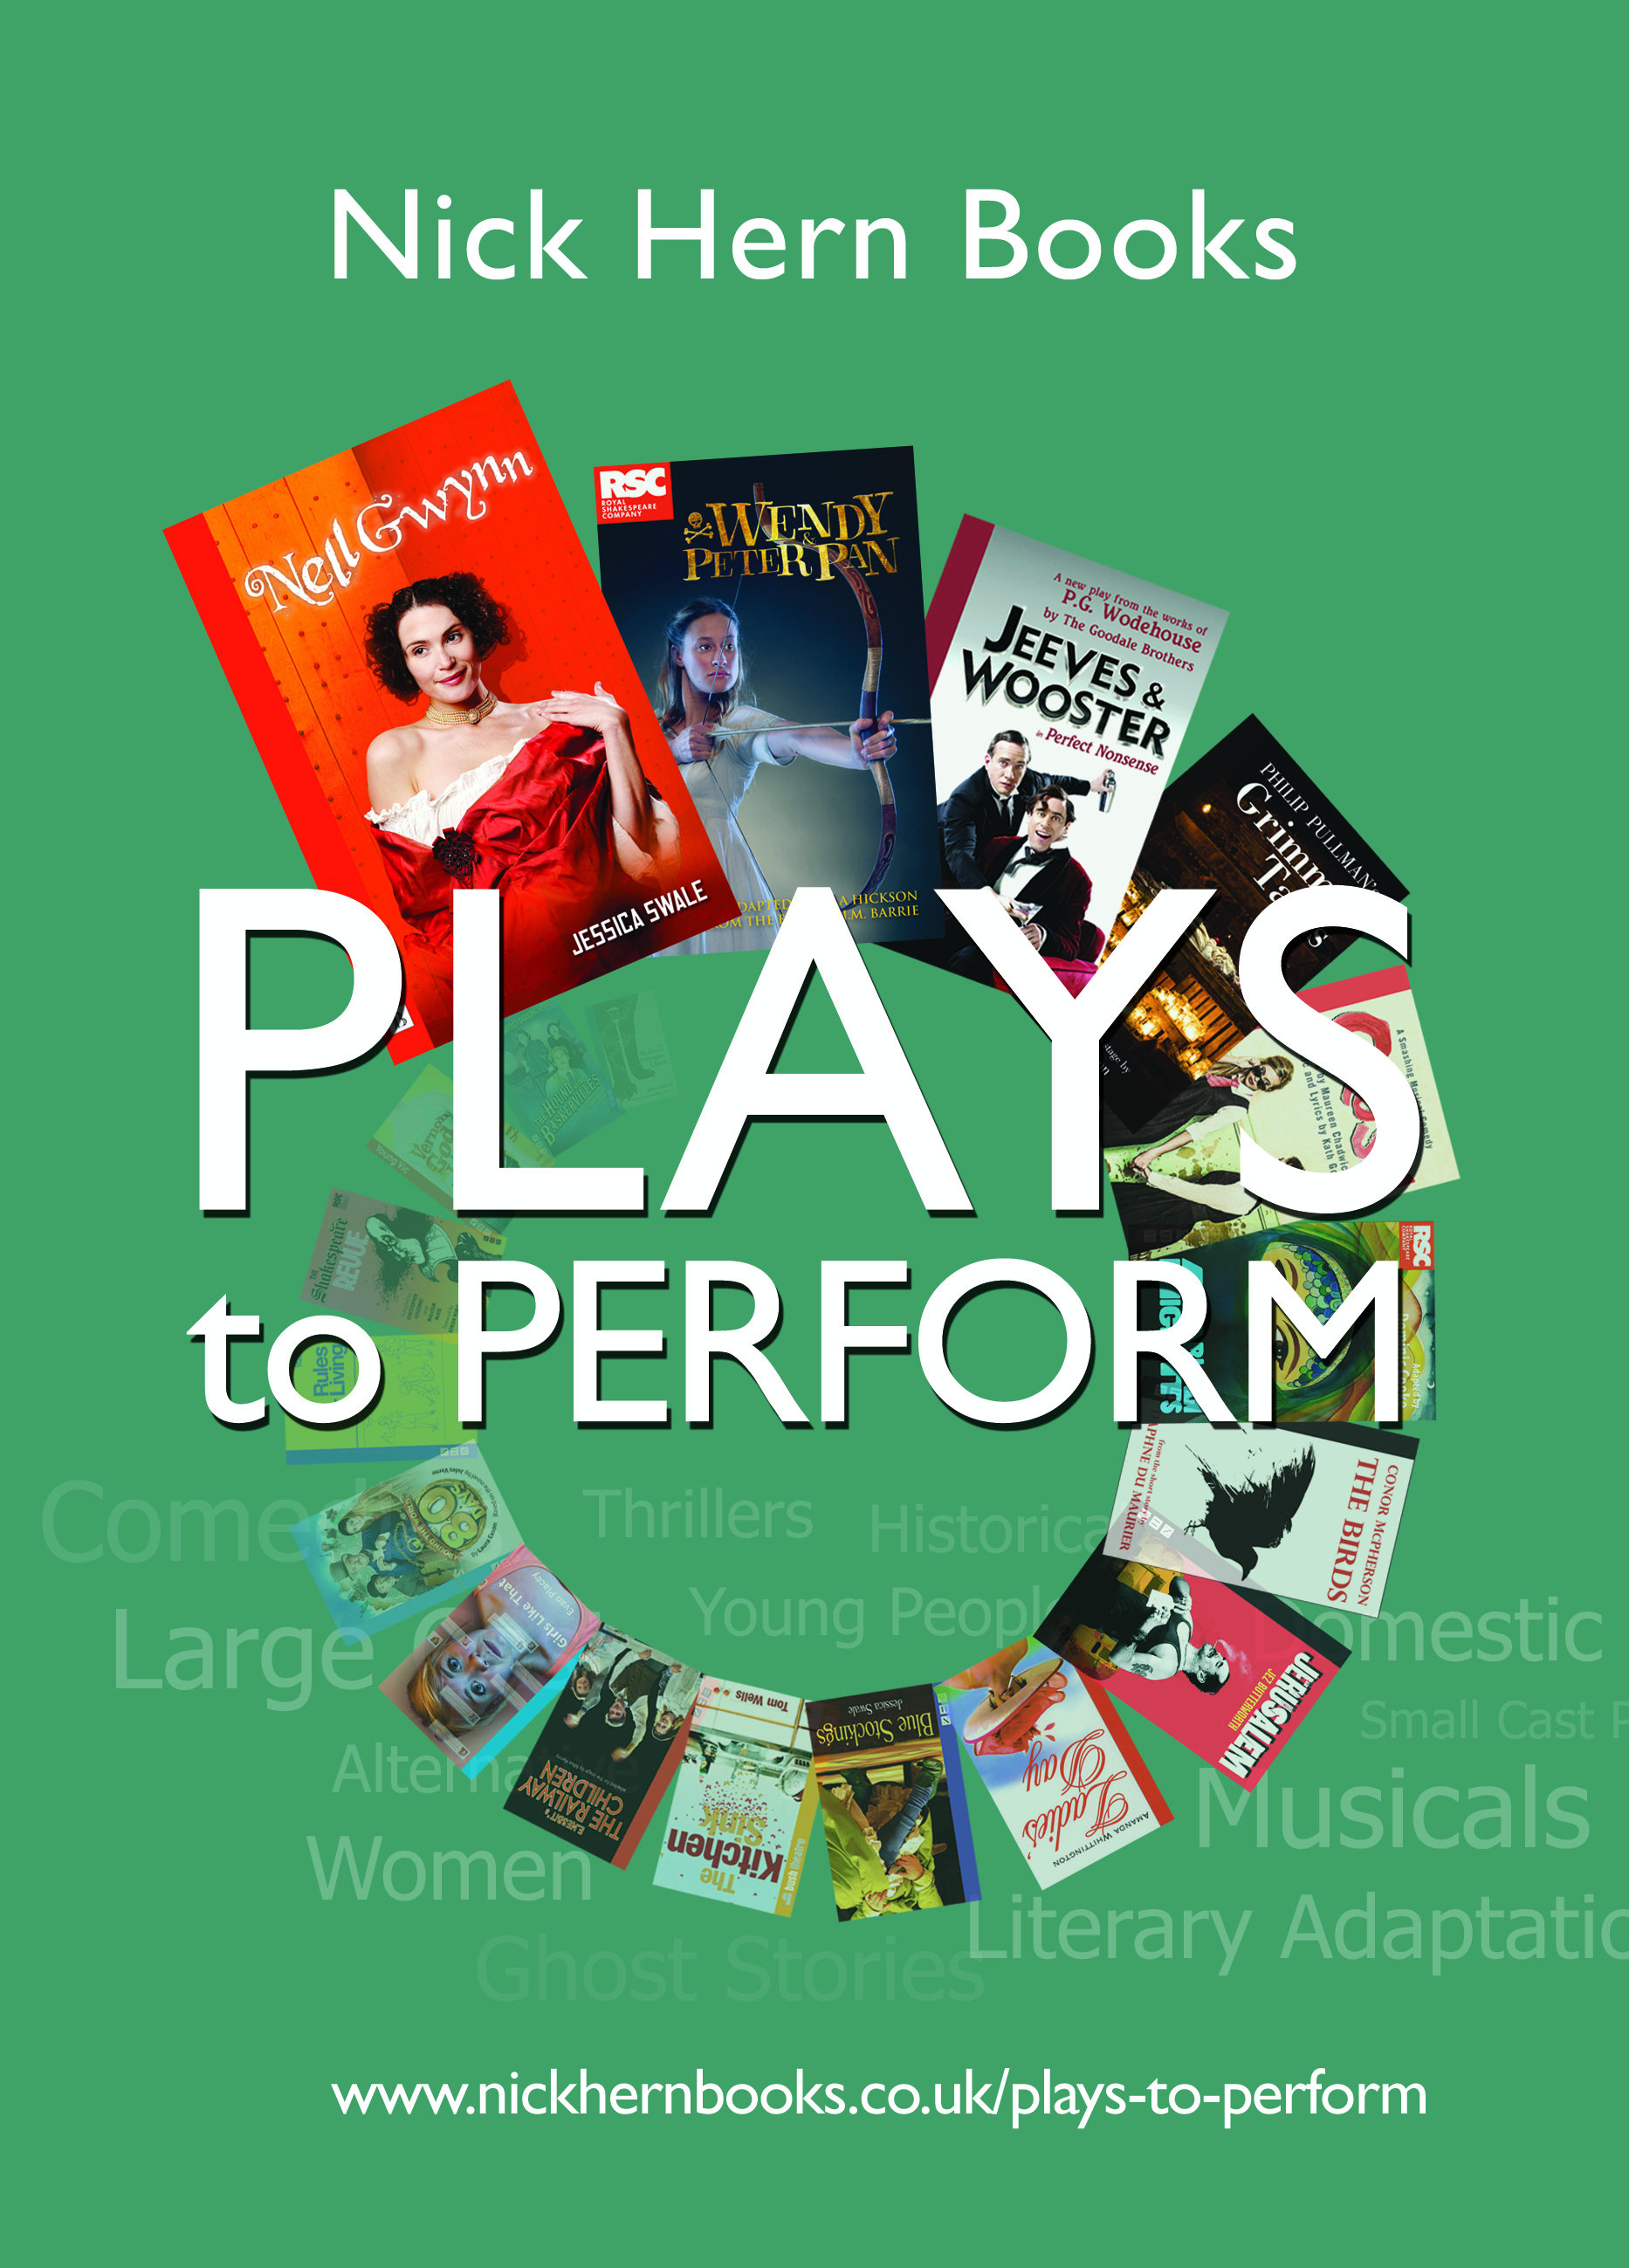 Our Plays To Perform Brochure is here!